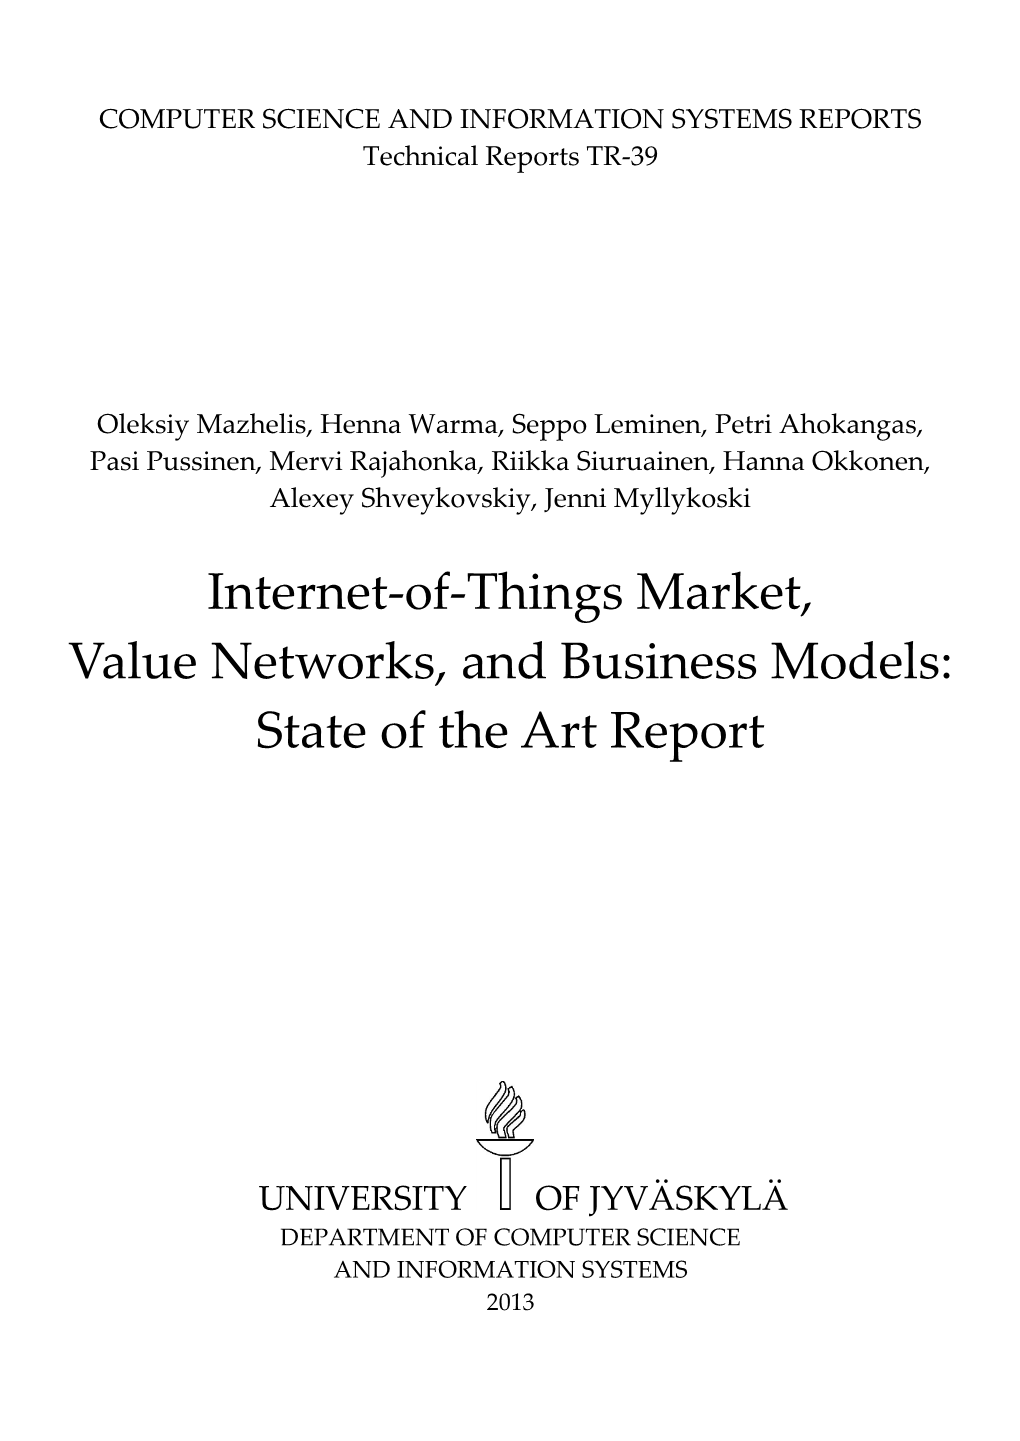 Internet-Of-Things Market, Value Networks, and Business Models: State of the Art Report